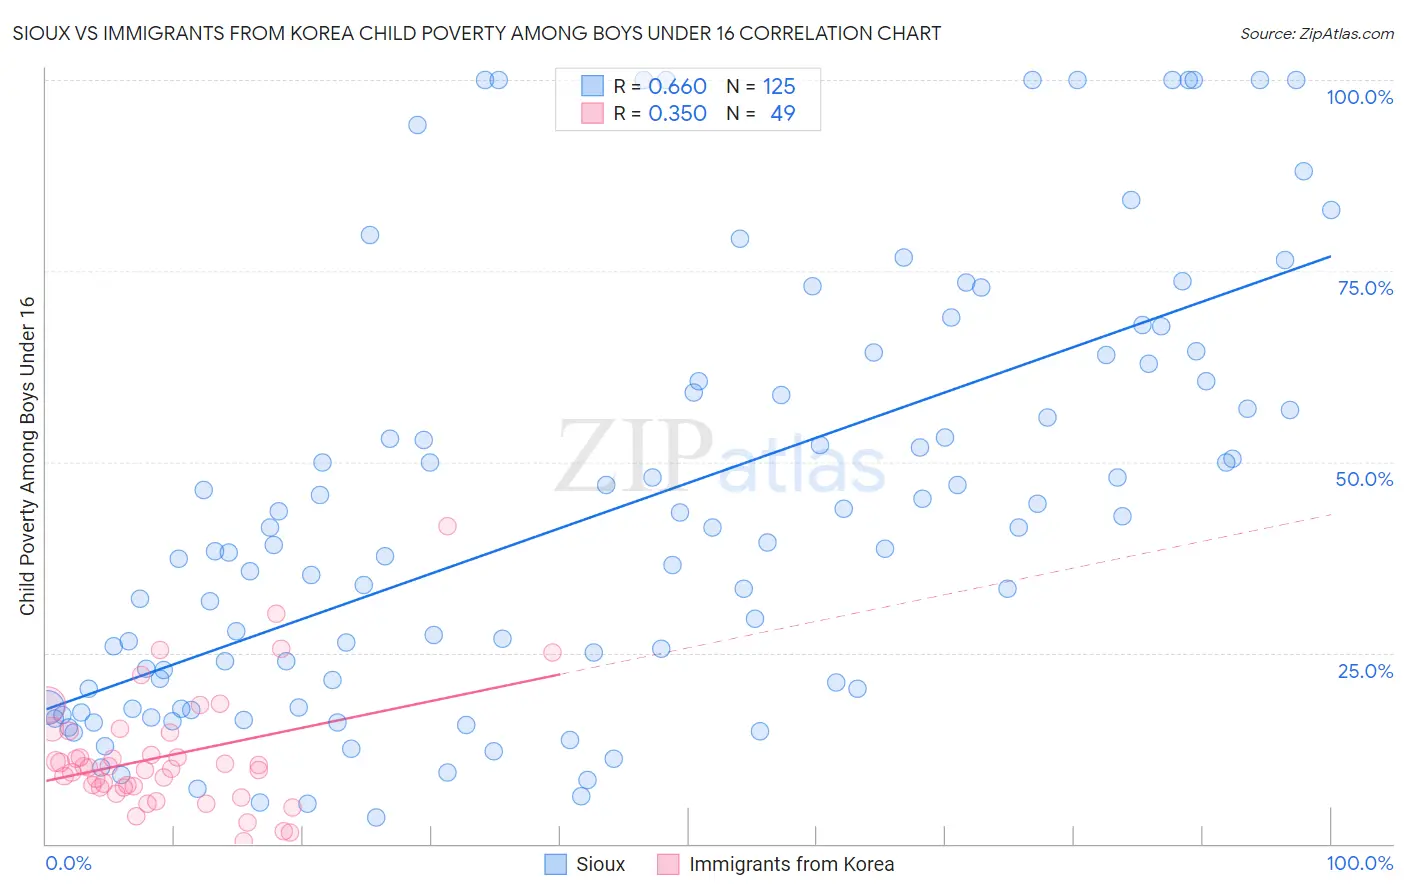 Sioux vs Immigrants from Korea Child Poverty Among Boys Under 16